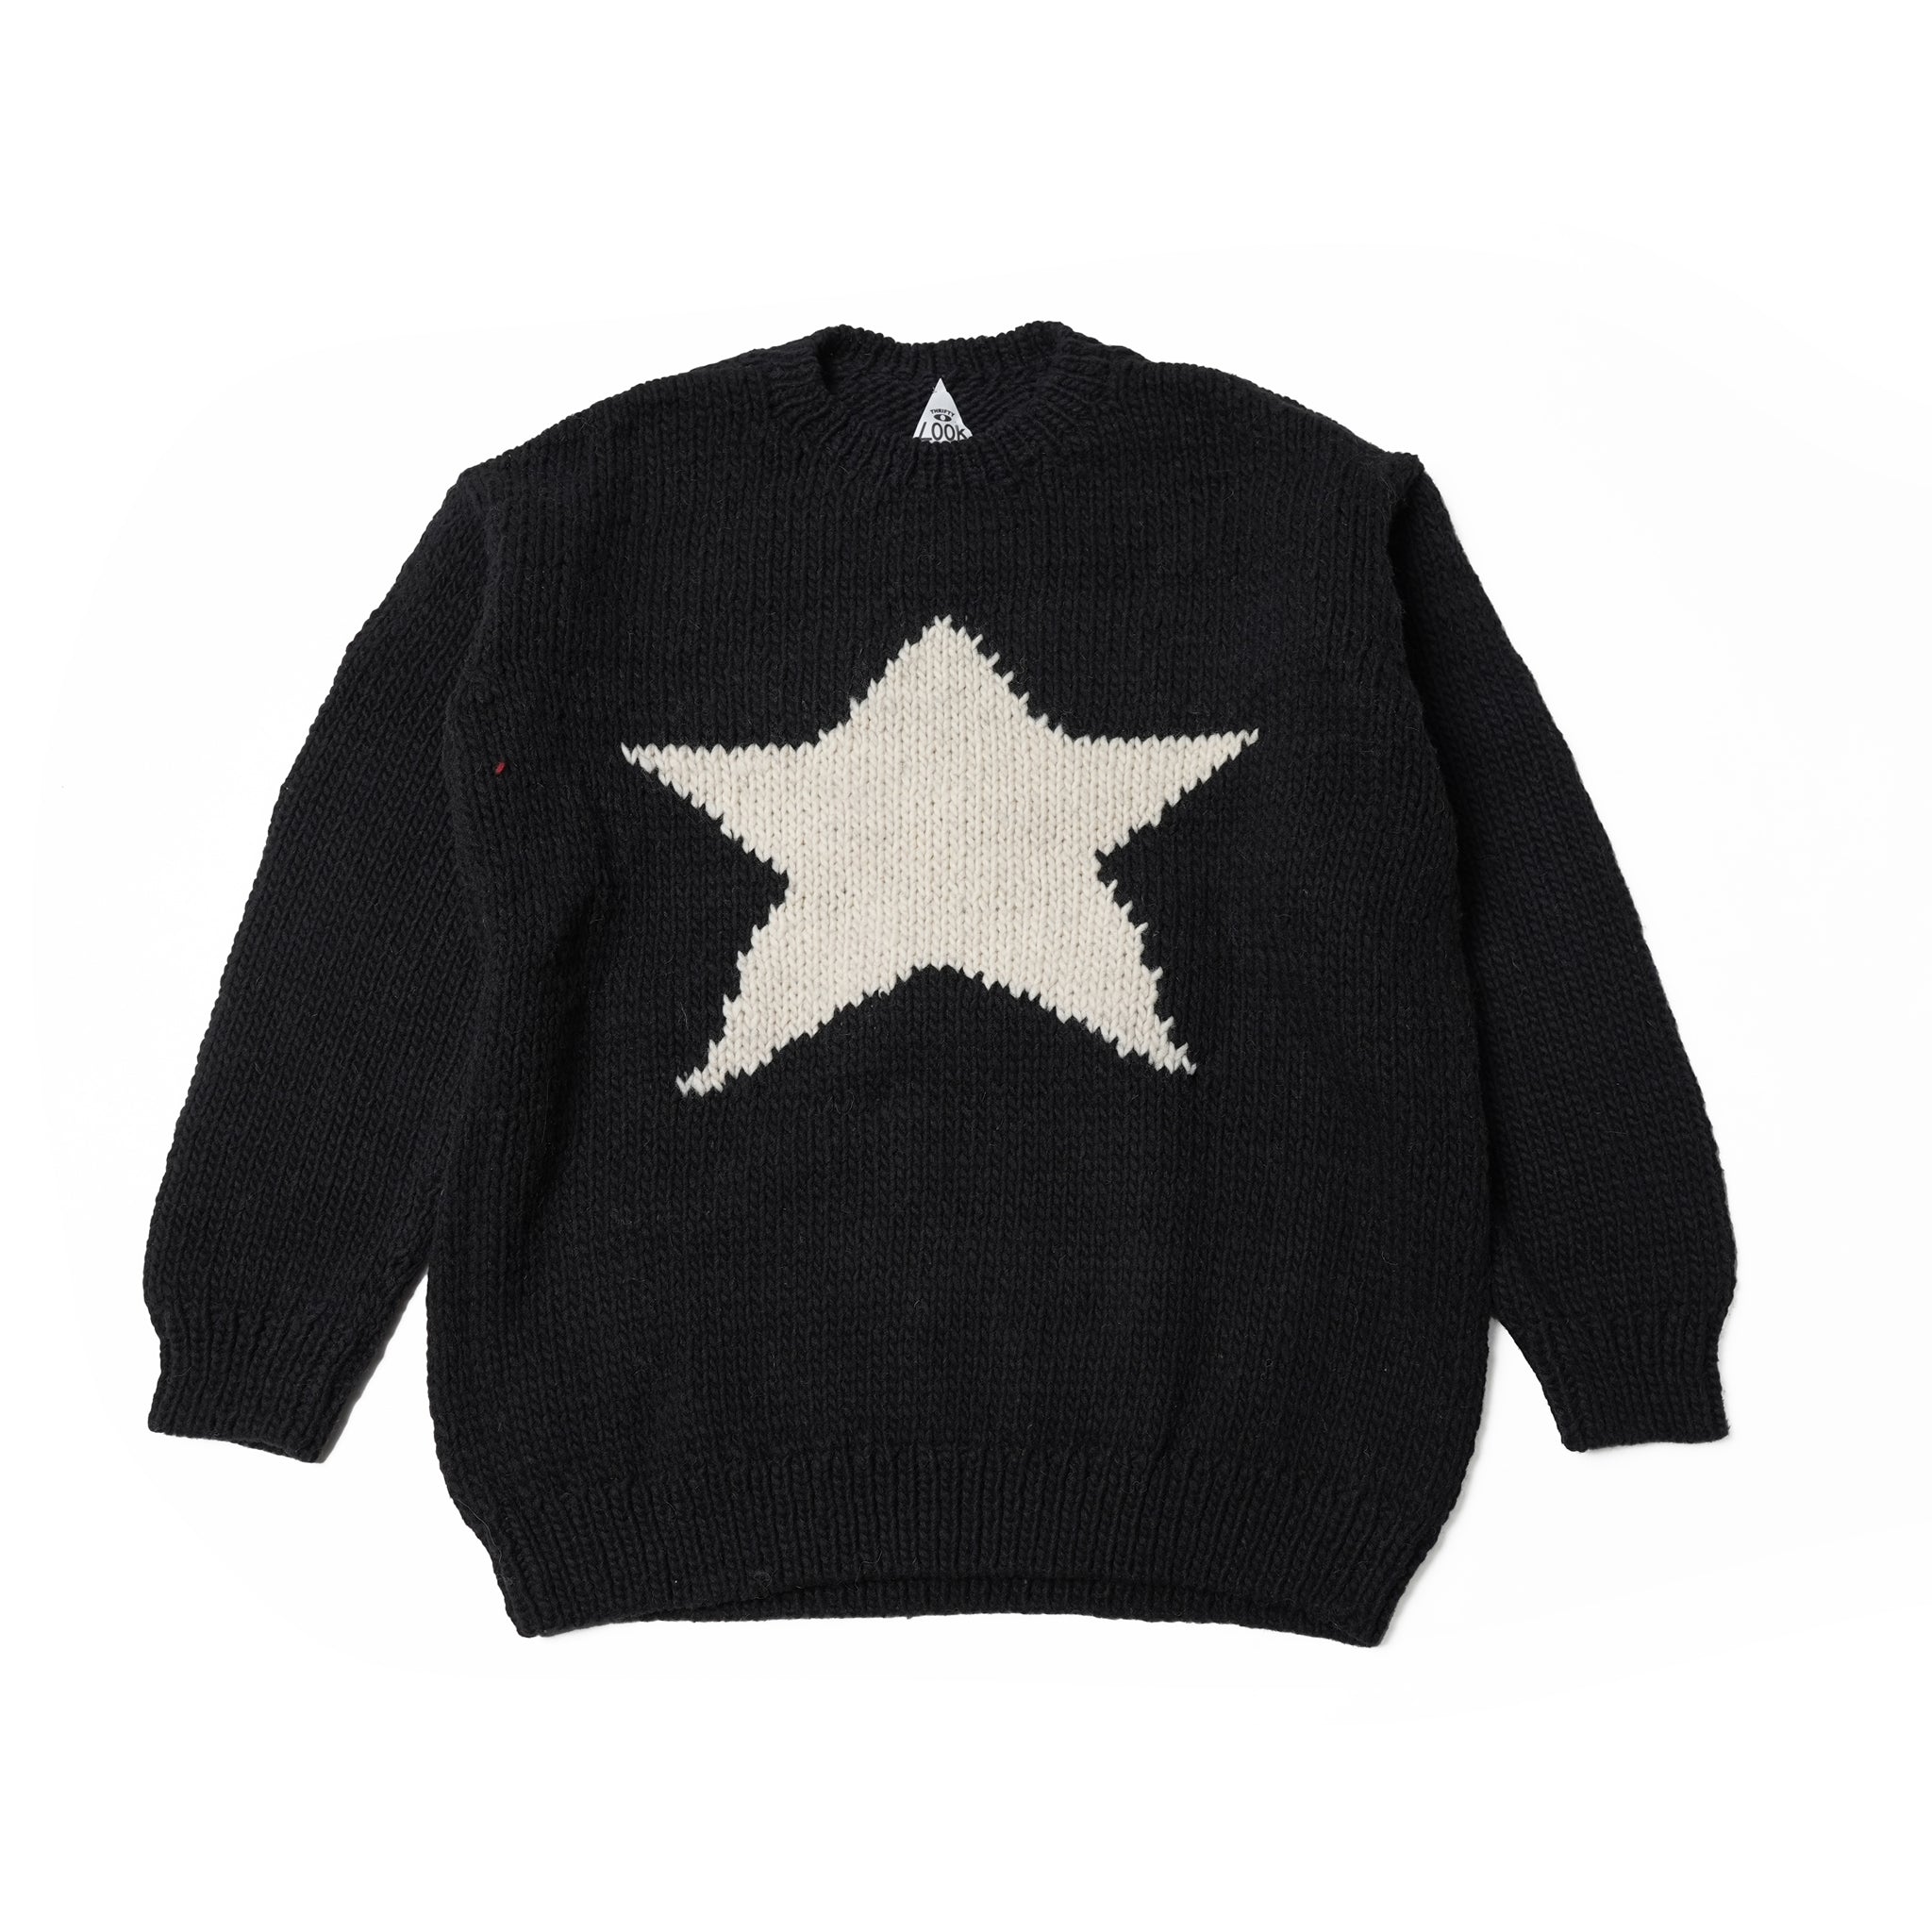 No:tl23f001 | Name:star hand knit crew | Color:Black【THRIFTY LOOK_スリフティールック】